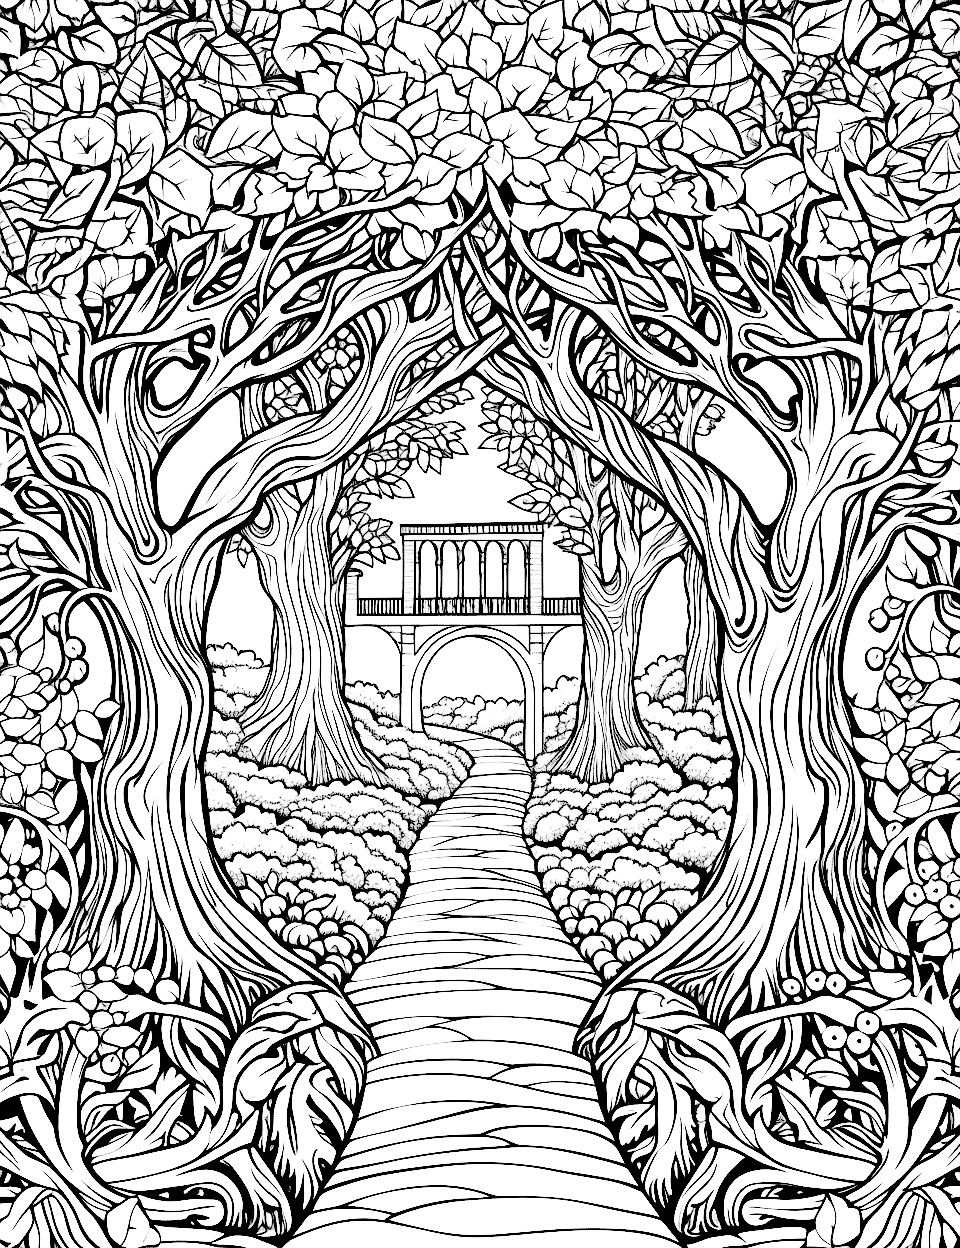 150 Adult Coloring Pages: Free Printable Sheets for Free Printable Hard Coloring Pages for Adults